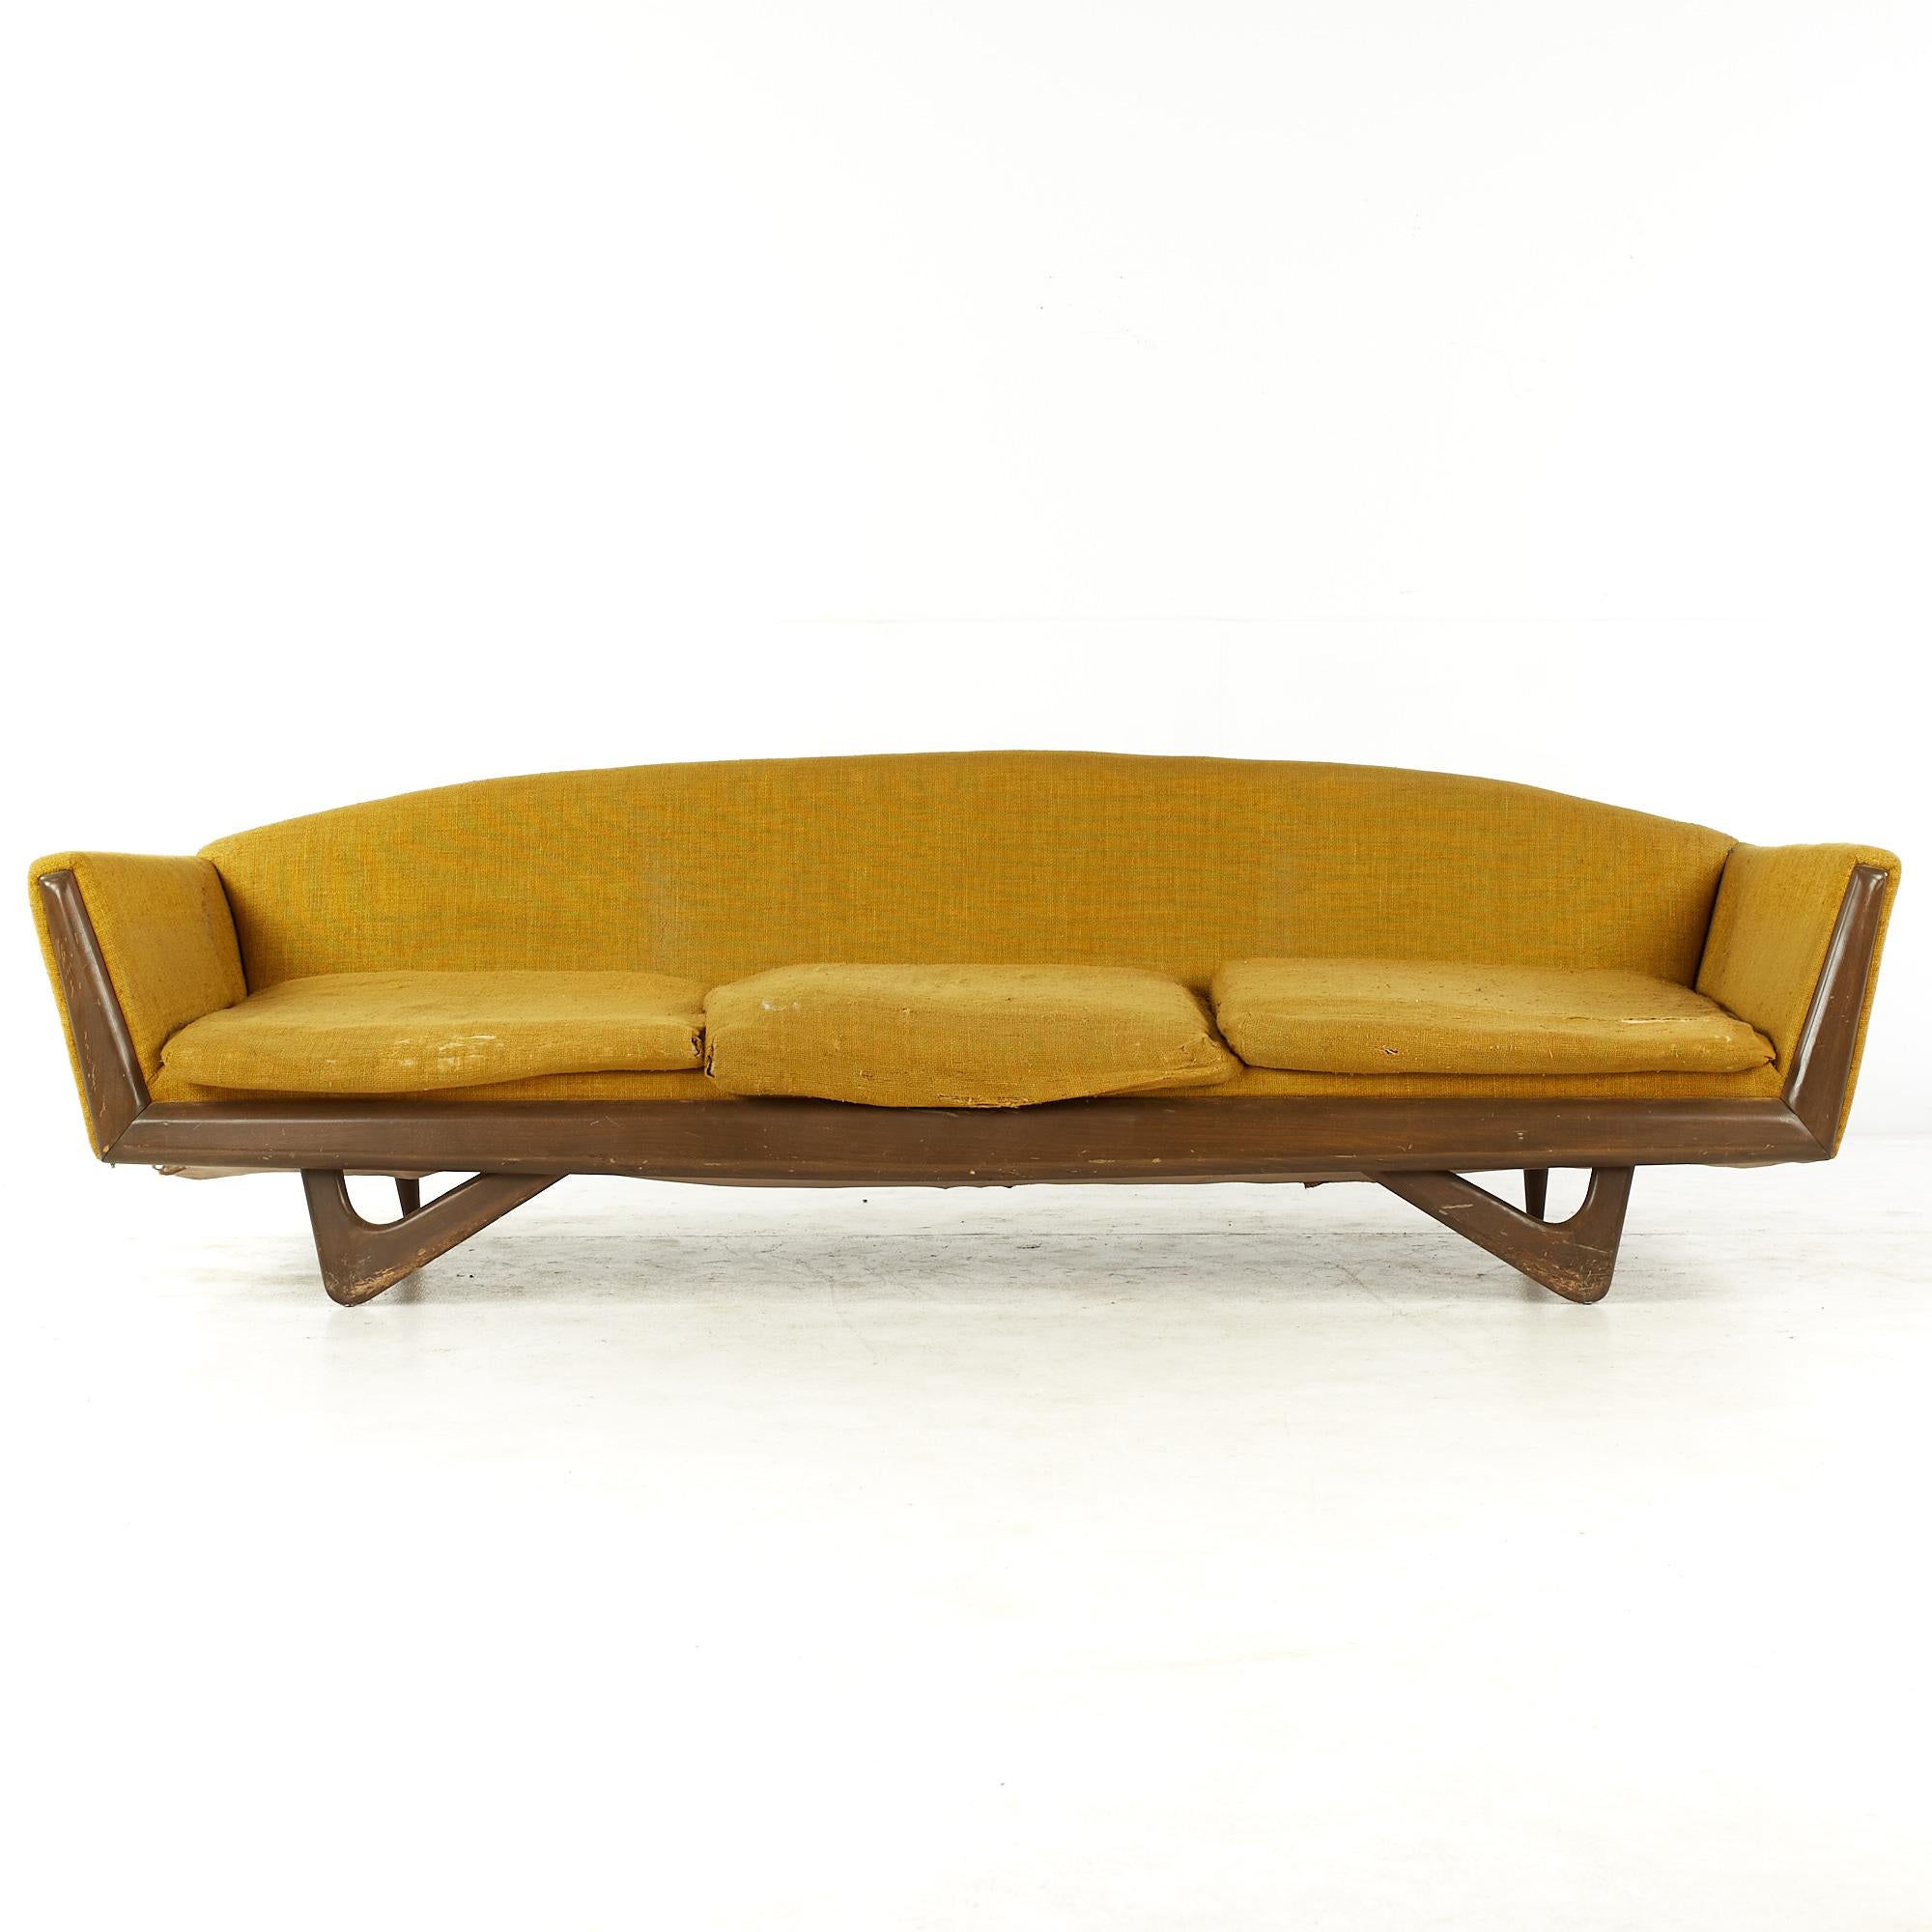 Adrian Pearsall Style Mid Century walnut Gondola sofa

This sofa measures: 93 wide x 34 deep x 27.5 inches high, with a seat height of 15 and arm height of 22.5 inches

All pieces of furniture can be had in what we call restored vintage